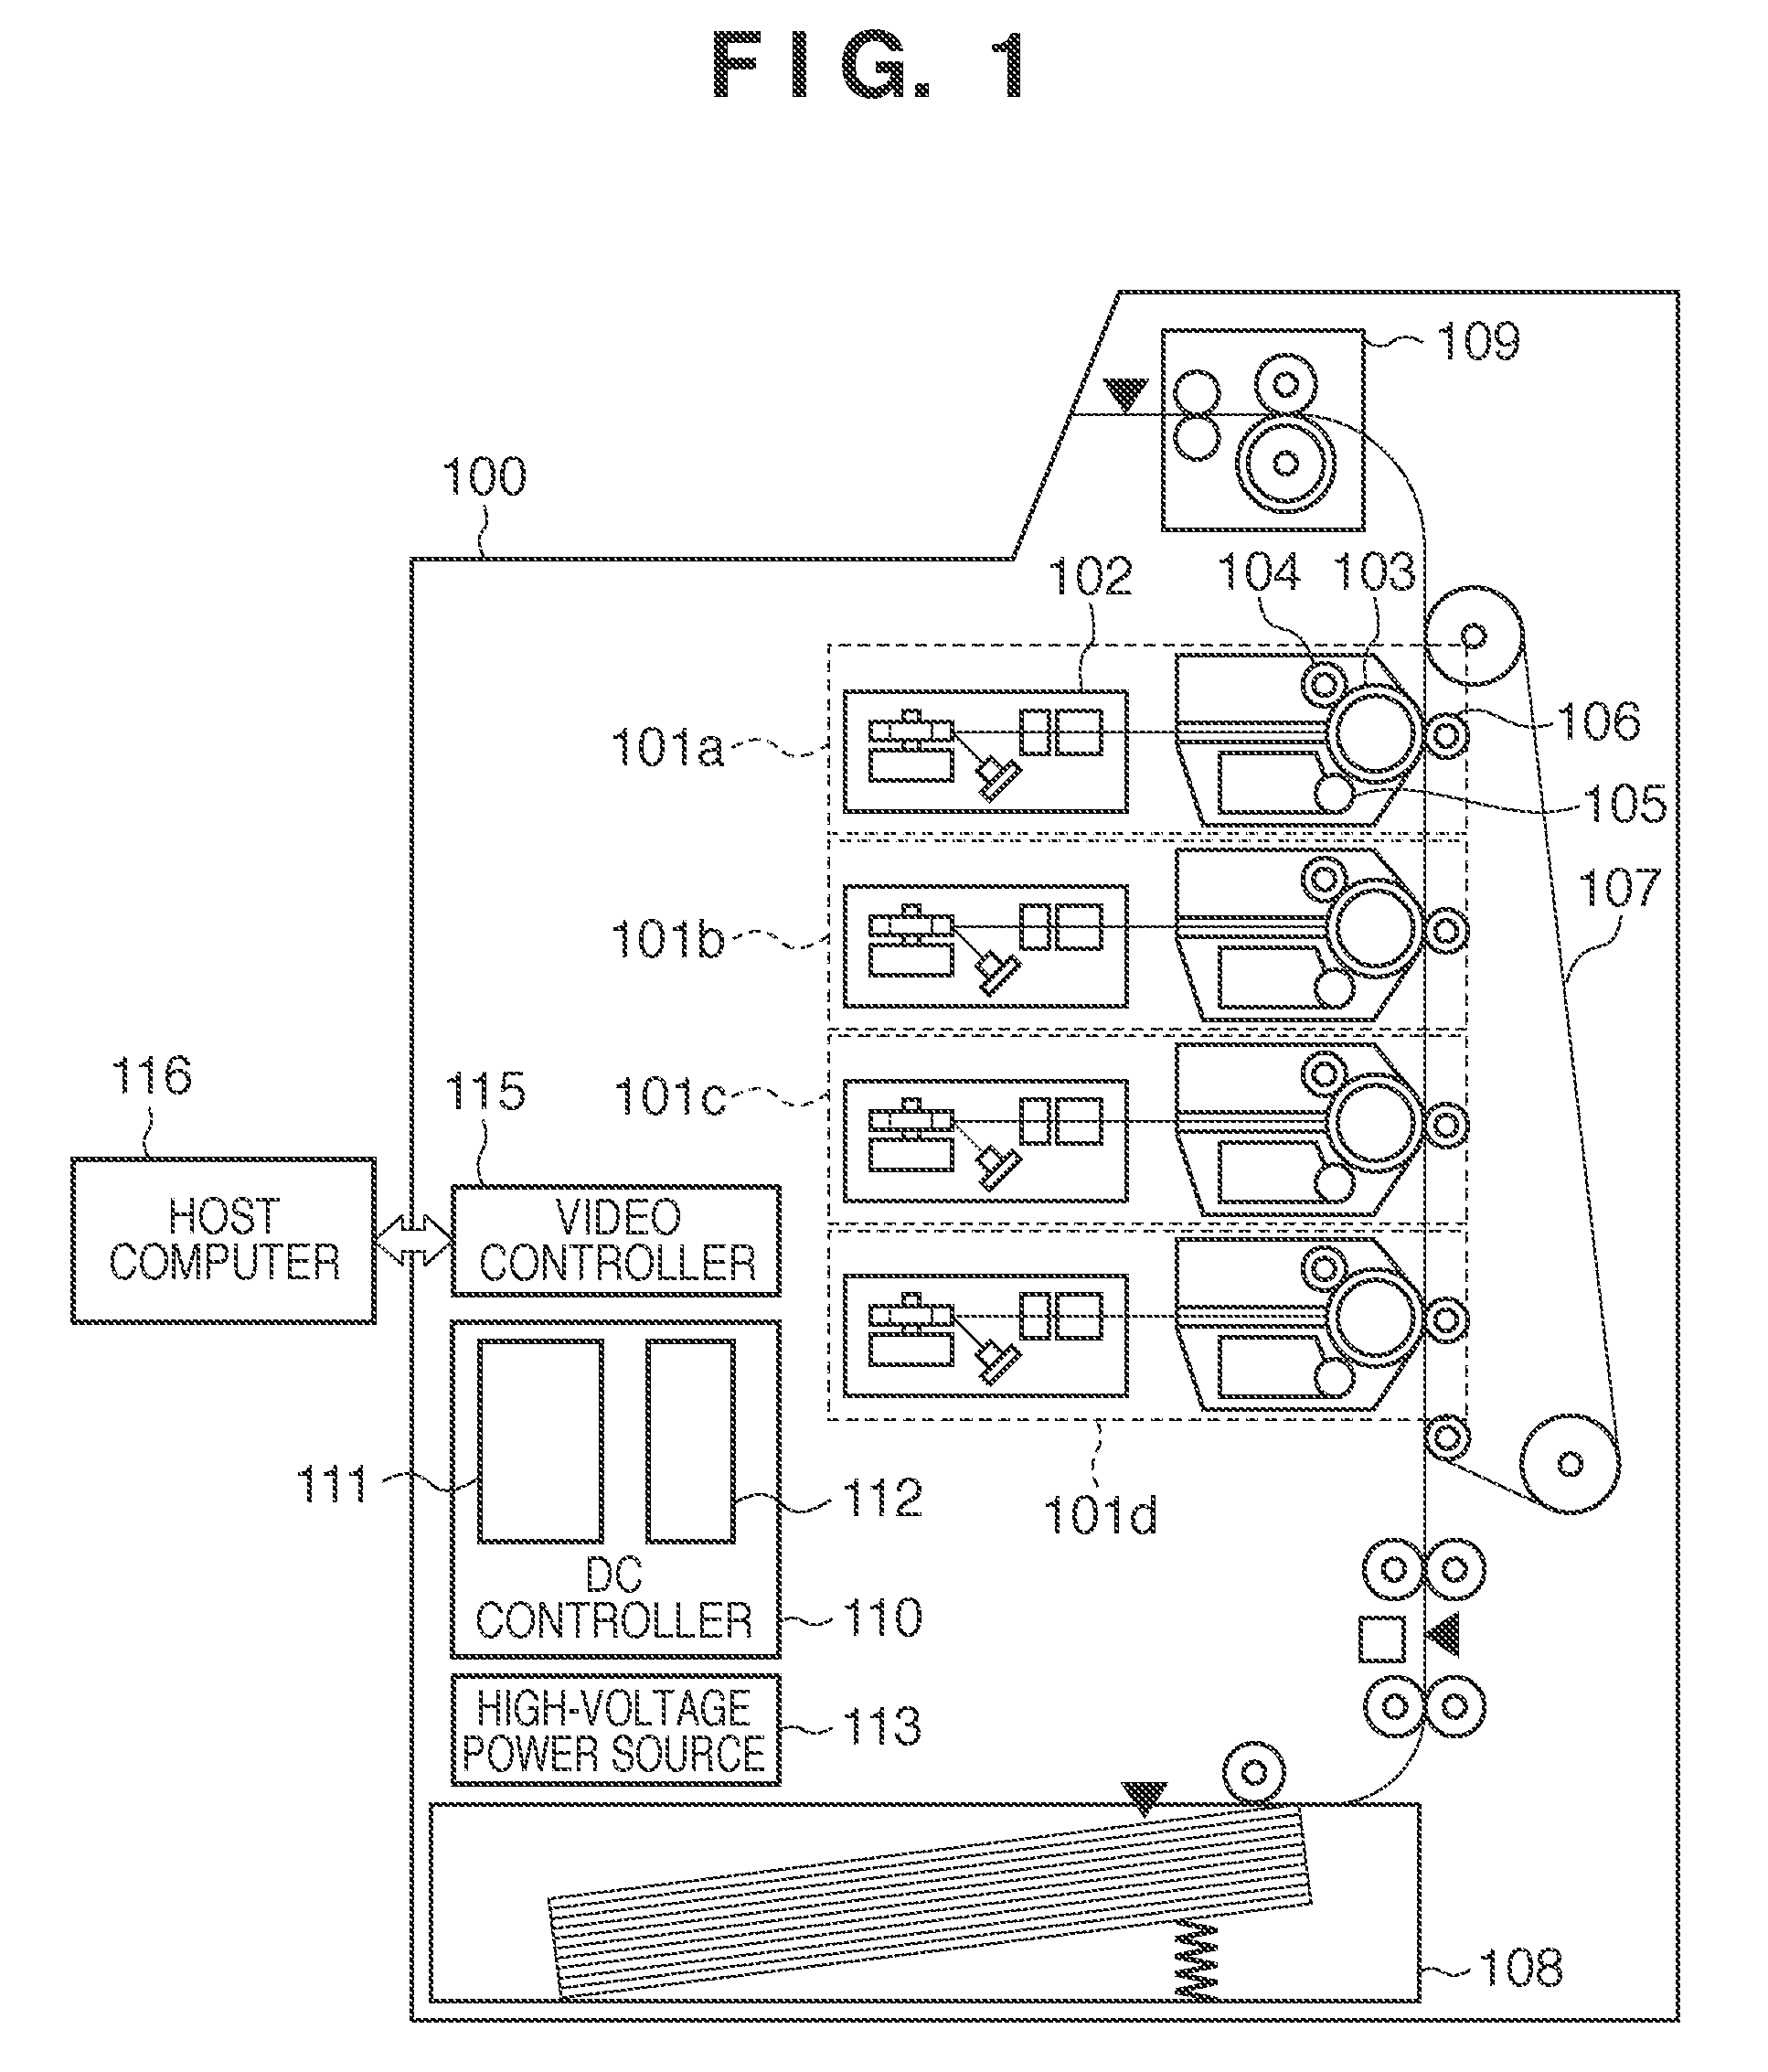 Technology for reducing circuit oscillations and ripple in a high-voltage power supply using a piezoelectric transformer